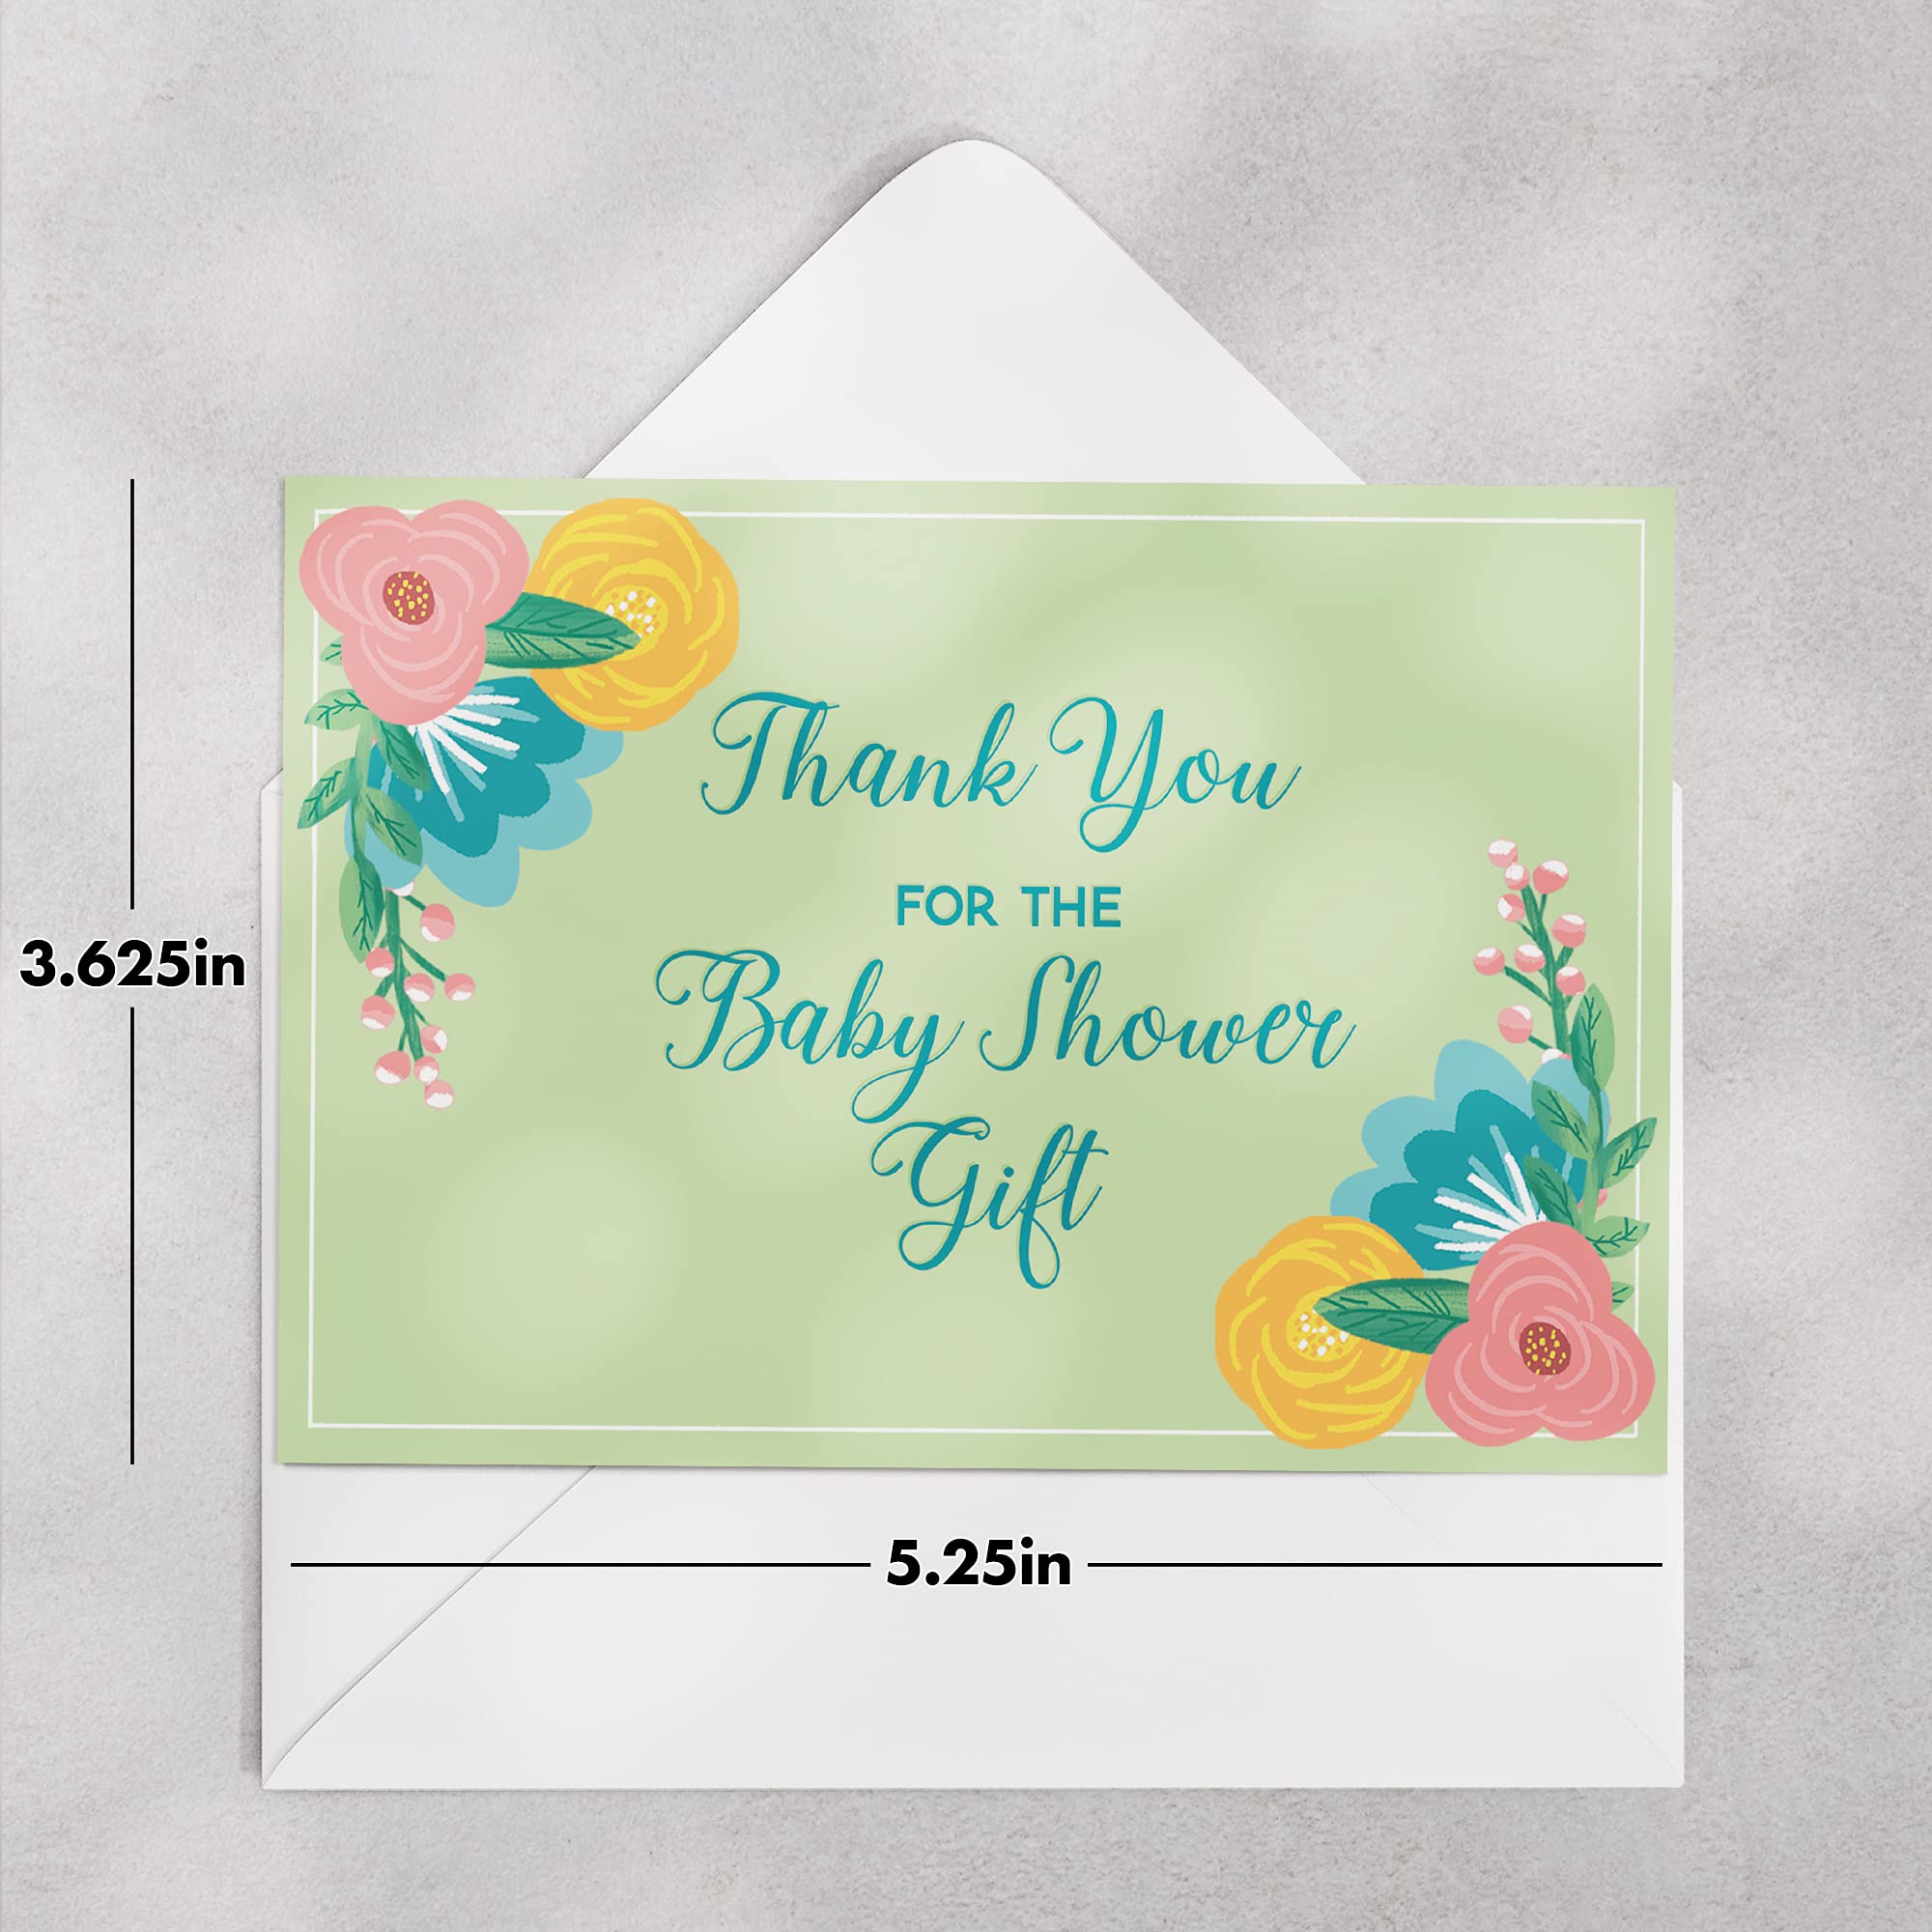 Designer Greetings Thank You Cards, Gender Neutral (8 Thank-You Notes and Envelopes for Baby Shower - Baby Boy or Baby Girl)